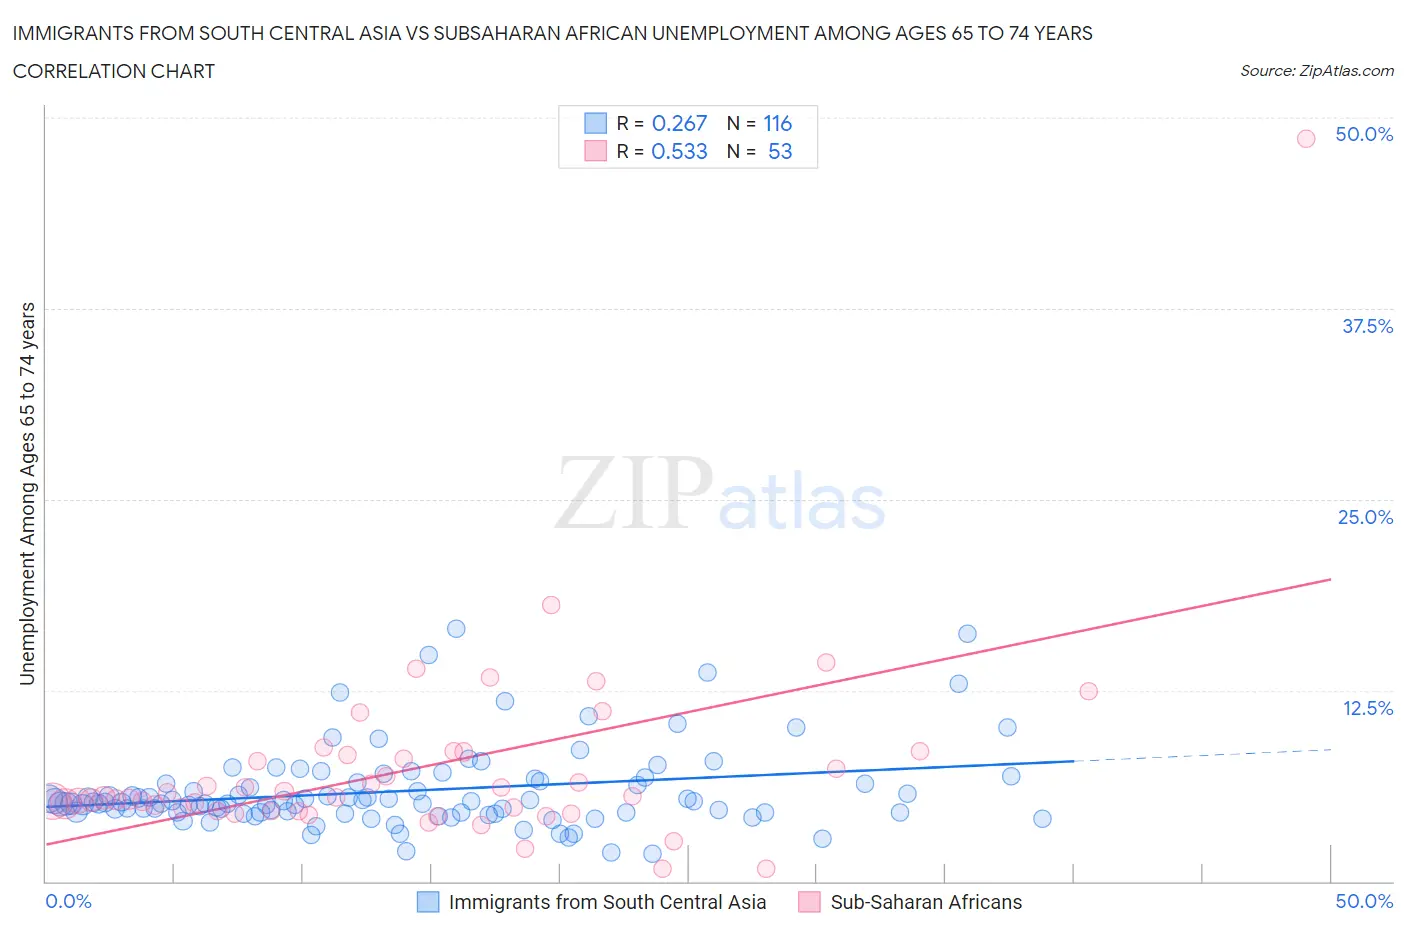 Immigrants from South Central Asia vs Subsaharan African Unemployment Among Ages 65 to 74 years